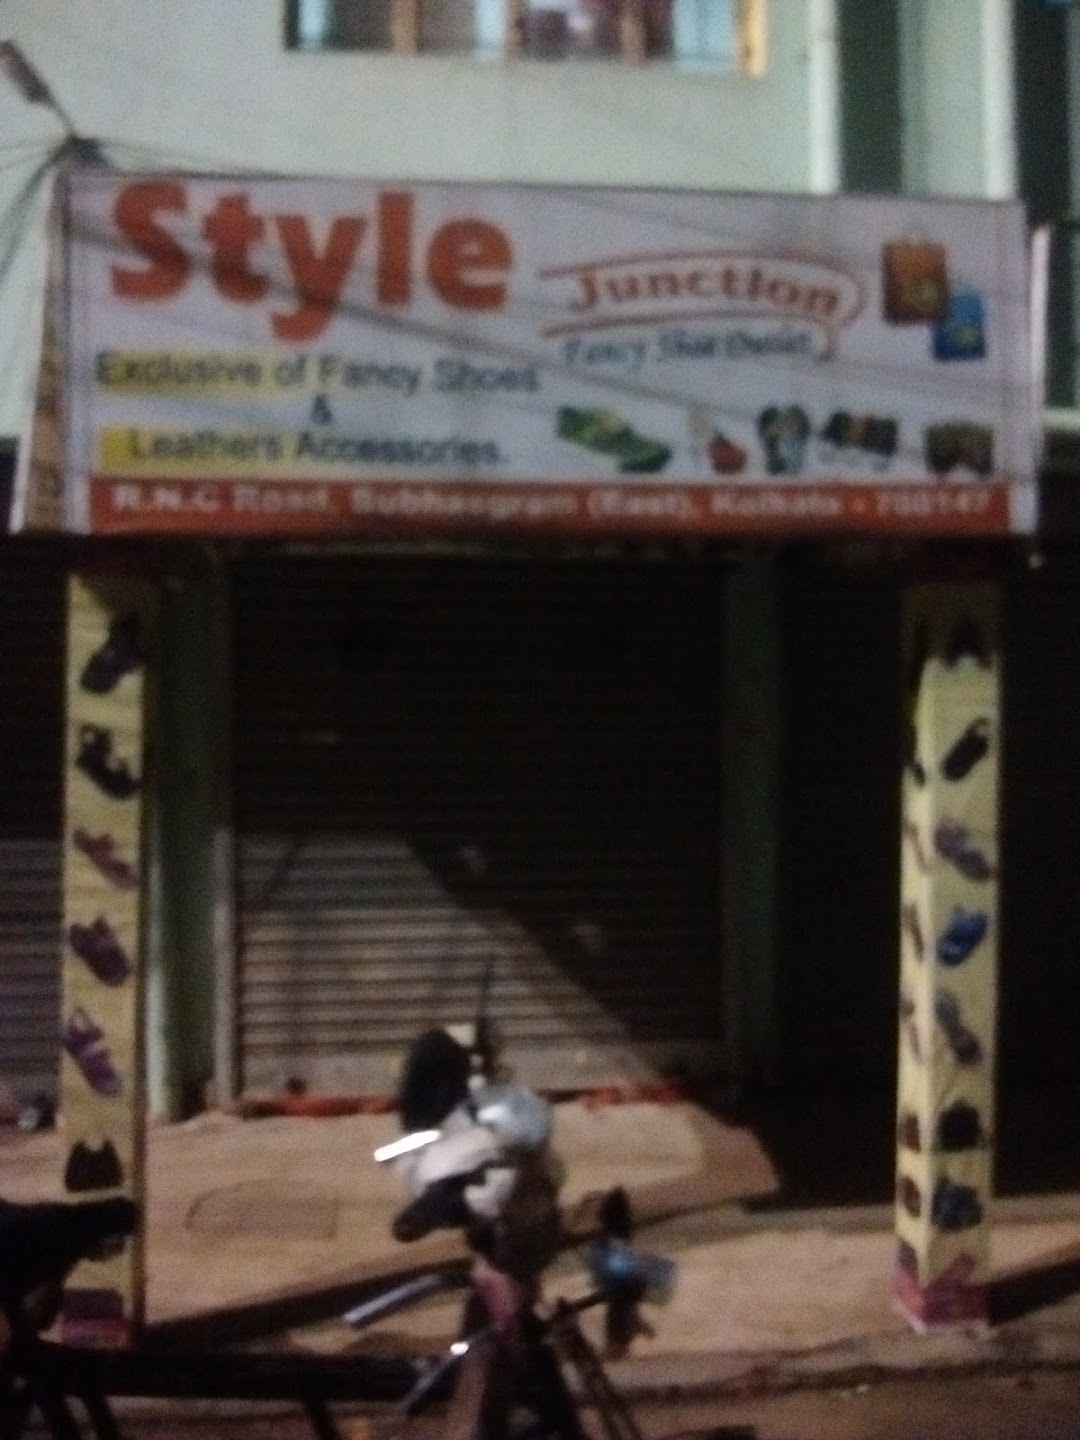 Style Junction